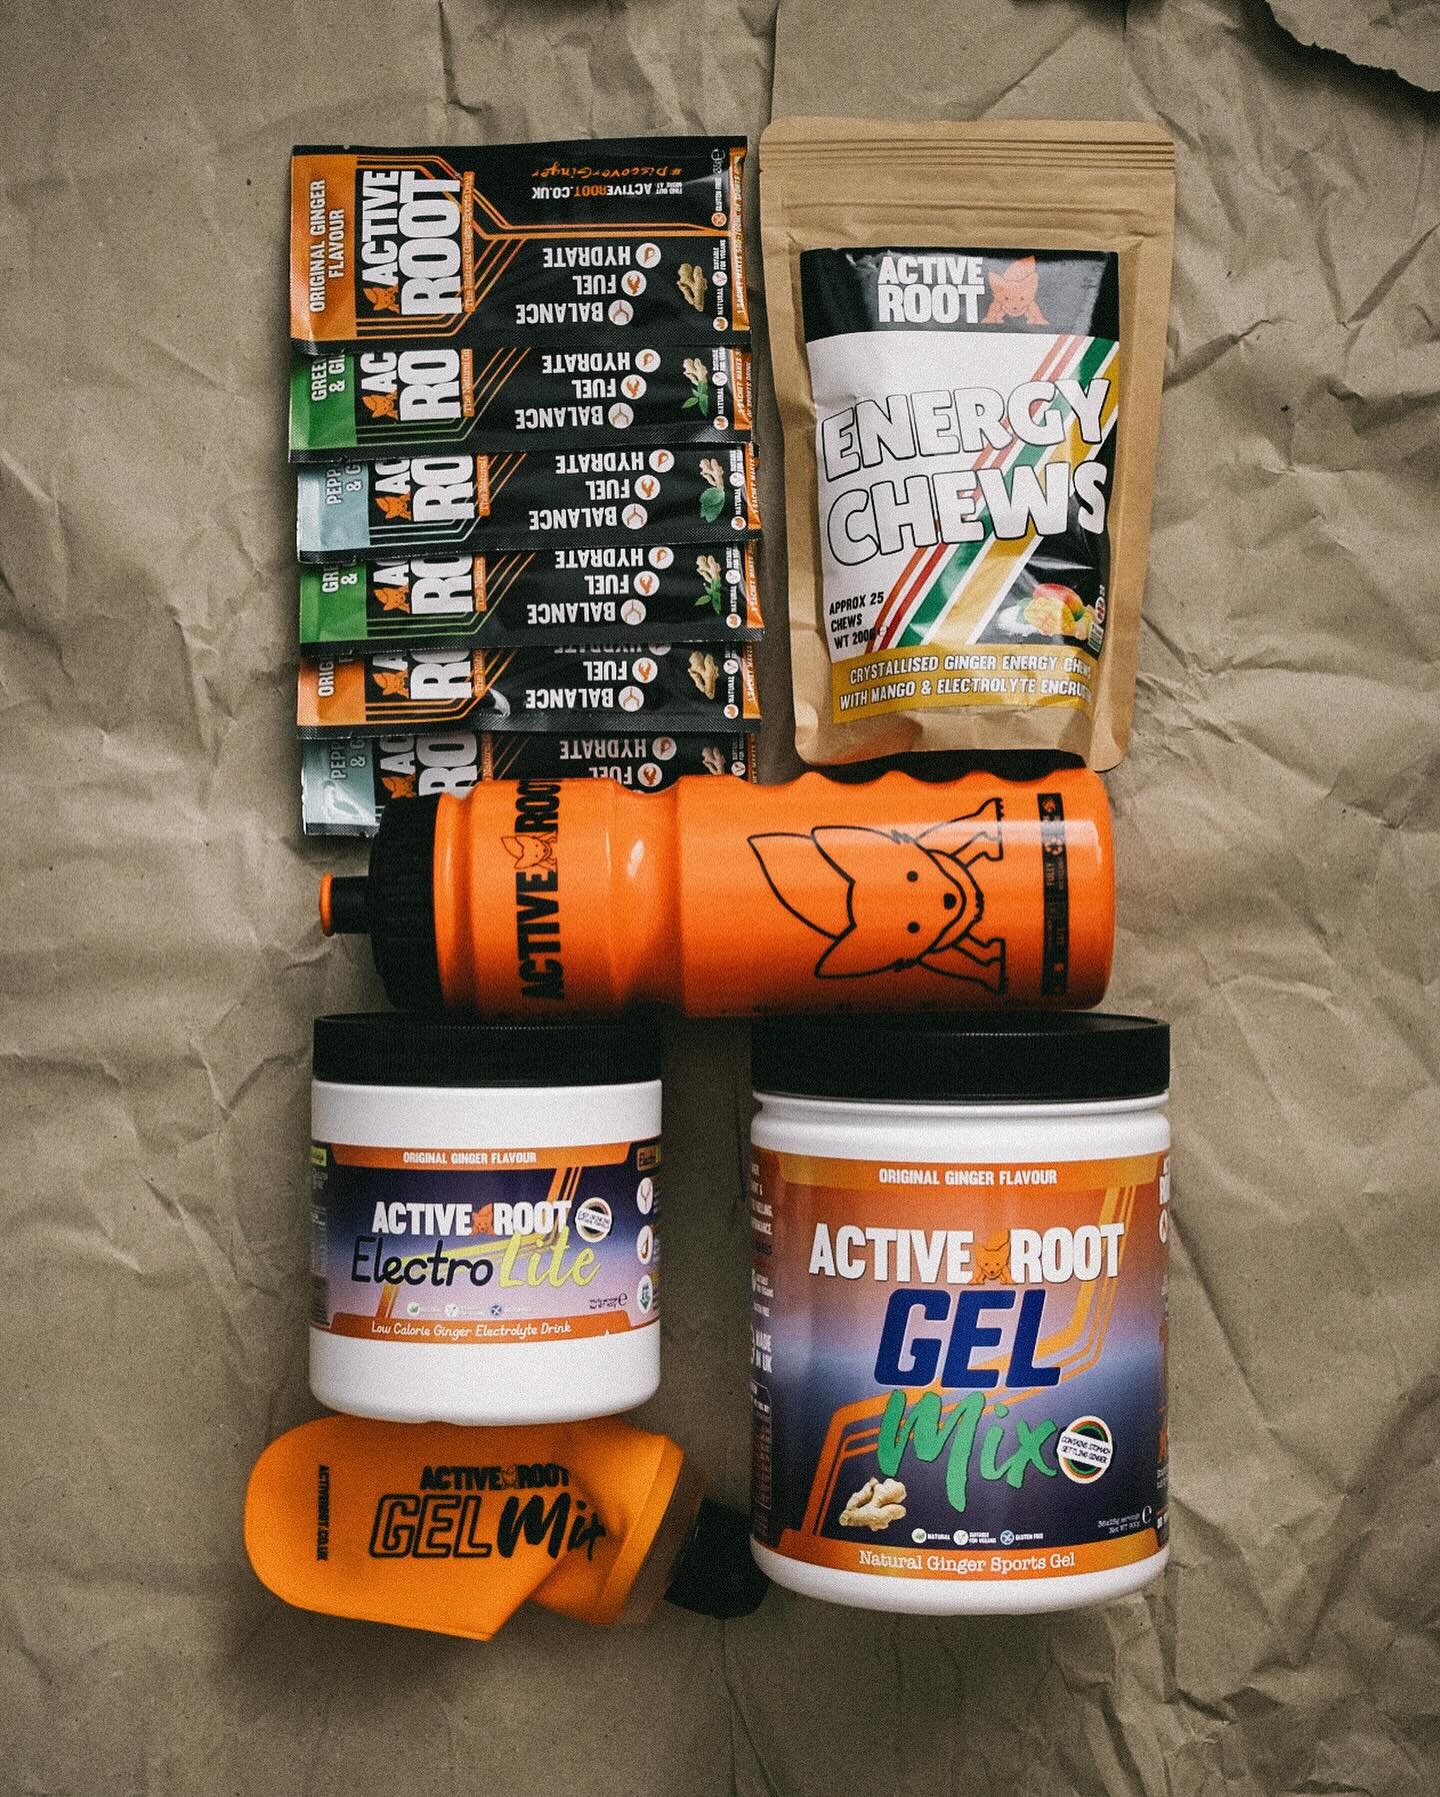 Fuel delivery today from @active.root 🦊 &mdash; perfect timing for the Coledale Horseshoe Fell Race this Saturday. Not feeling super fit at the moment so may need all this just to get me round the course!